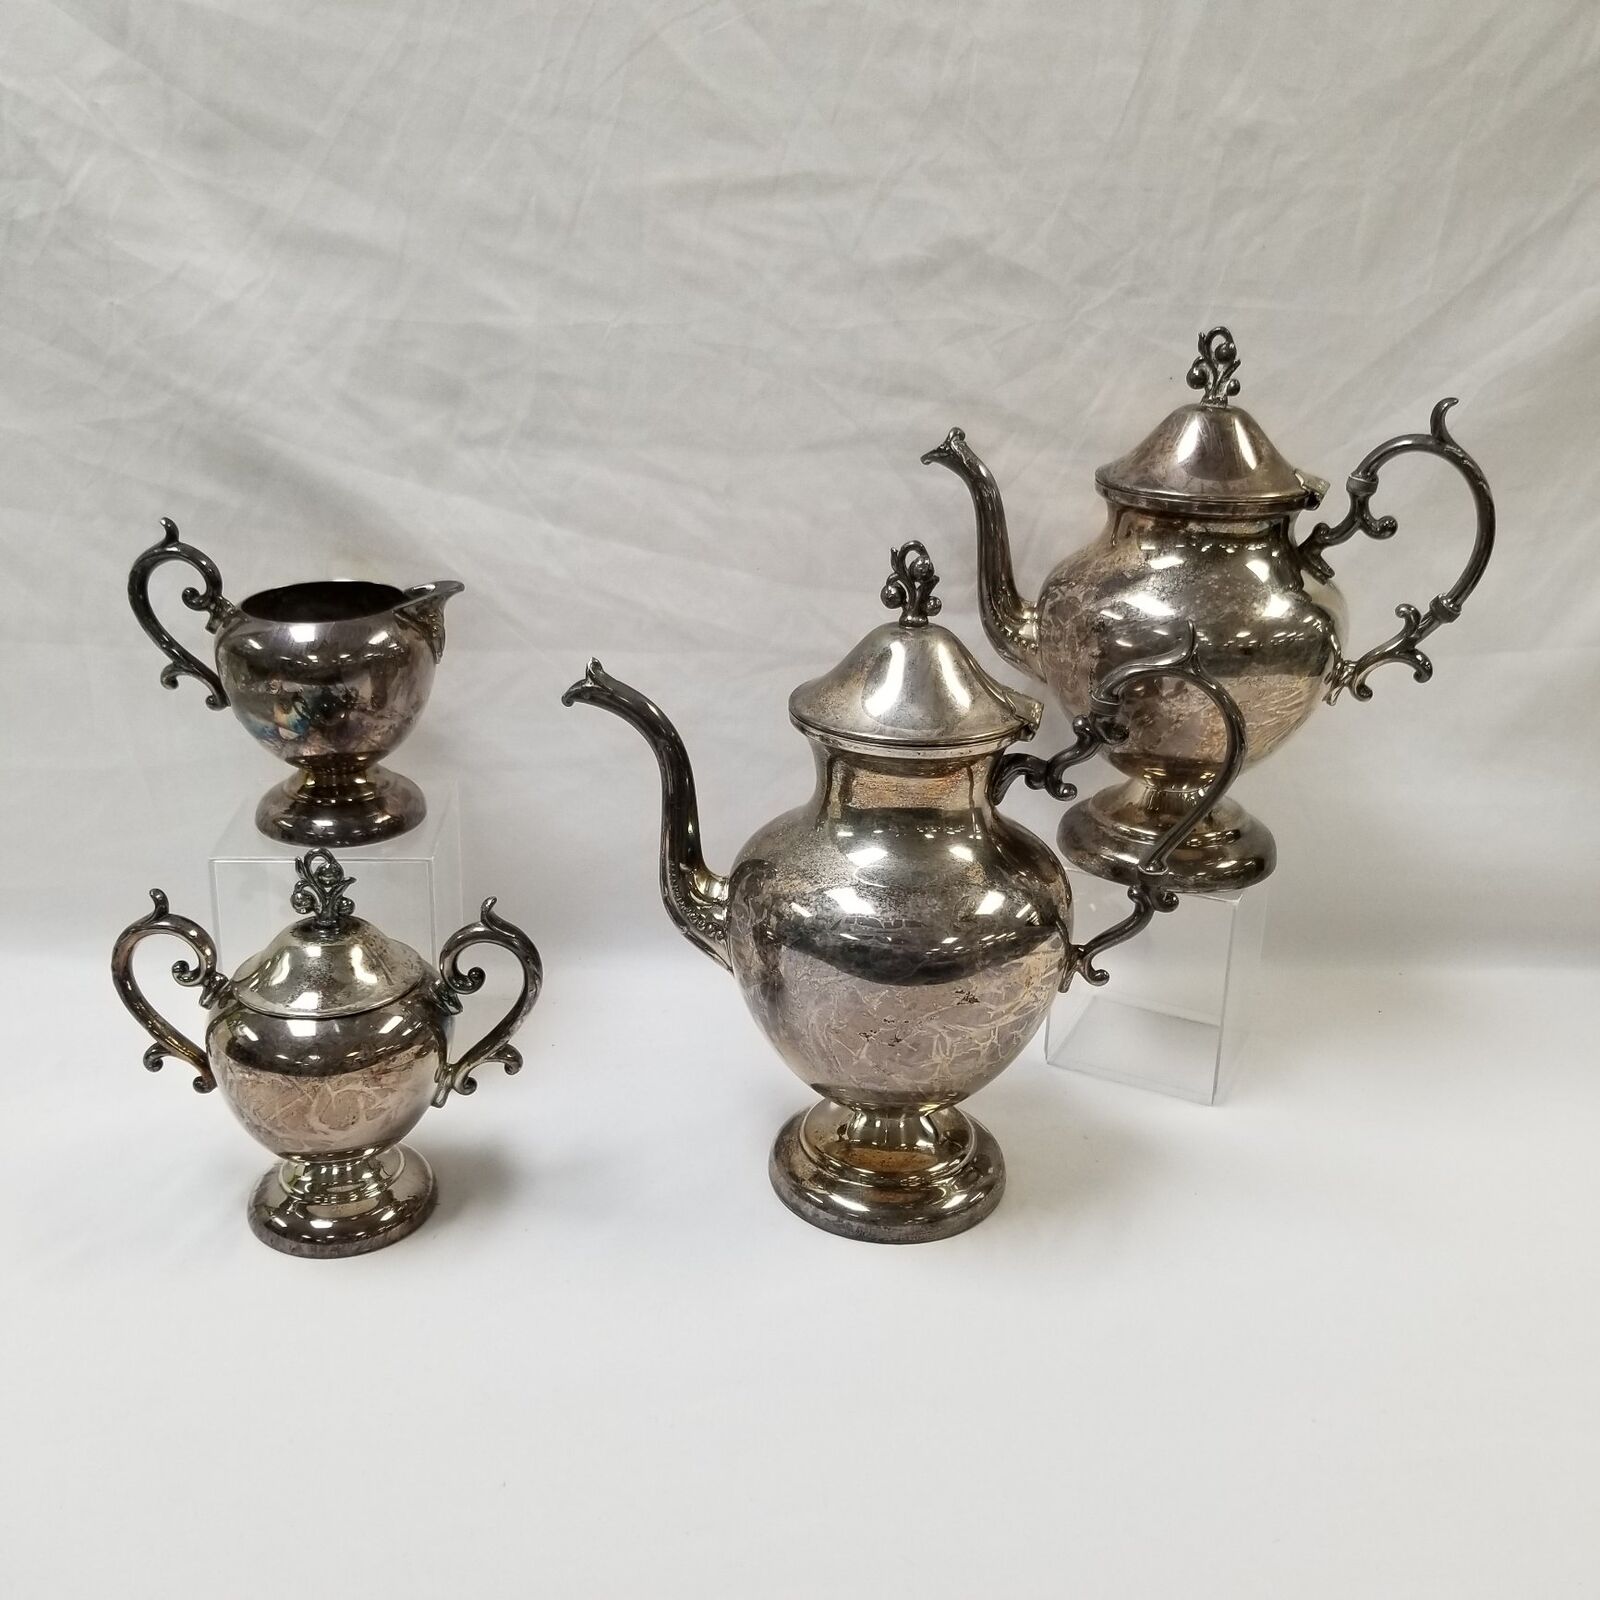 4pc Lot of Vintage Silver Plate on Copper Teapots w/ Creamer & Sugar Bowl^